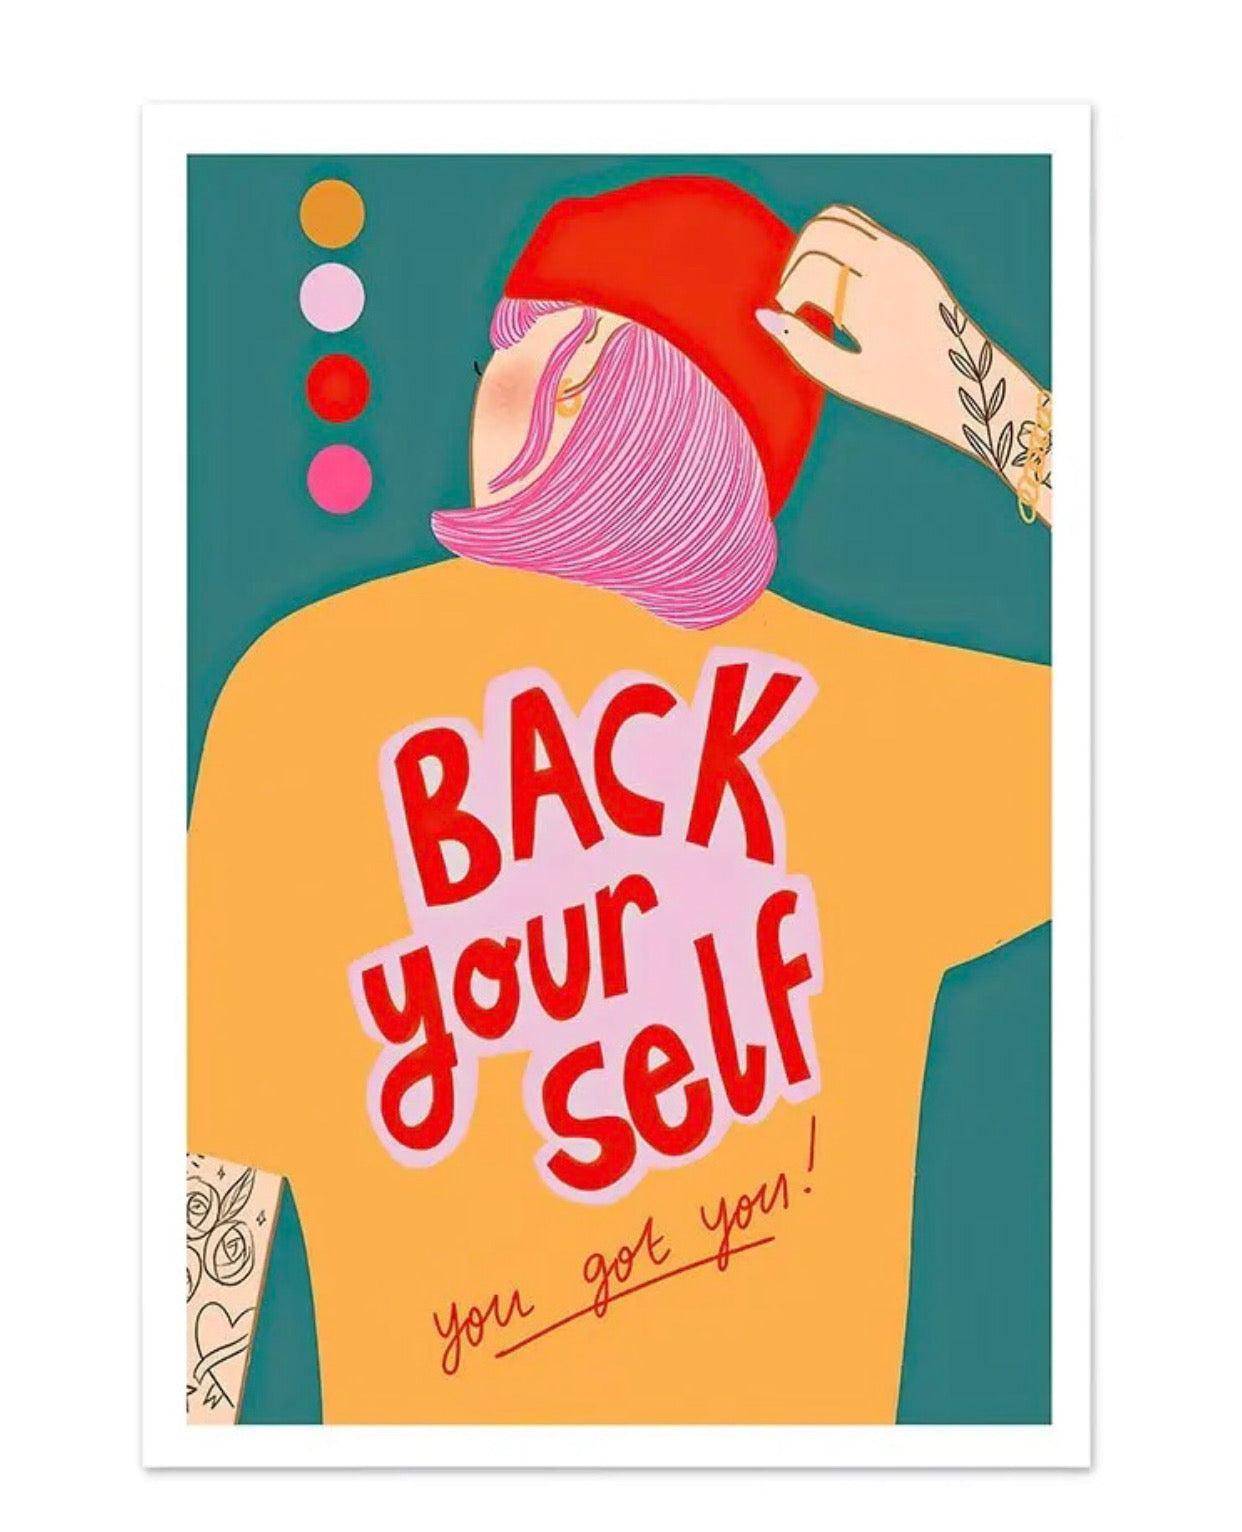 "back your self" poster